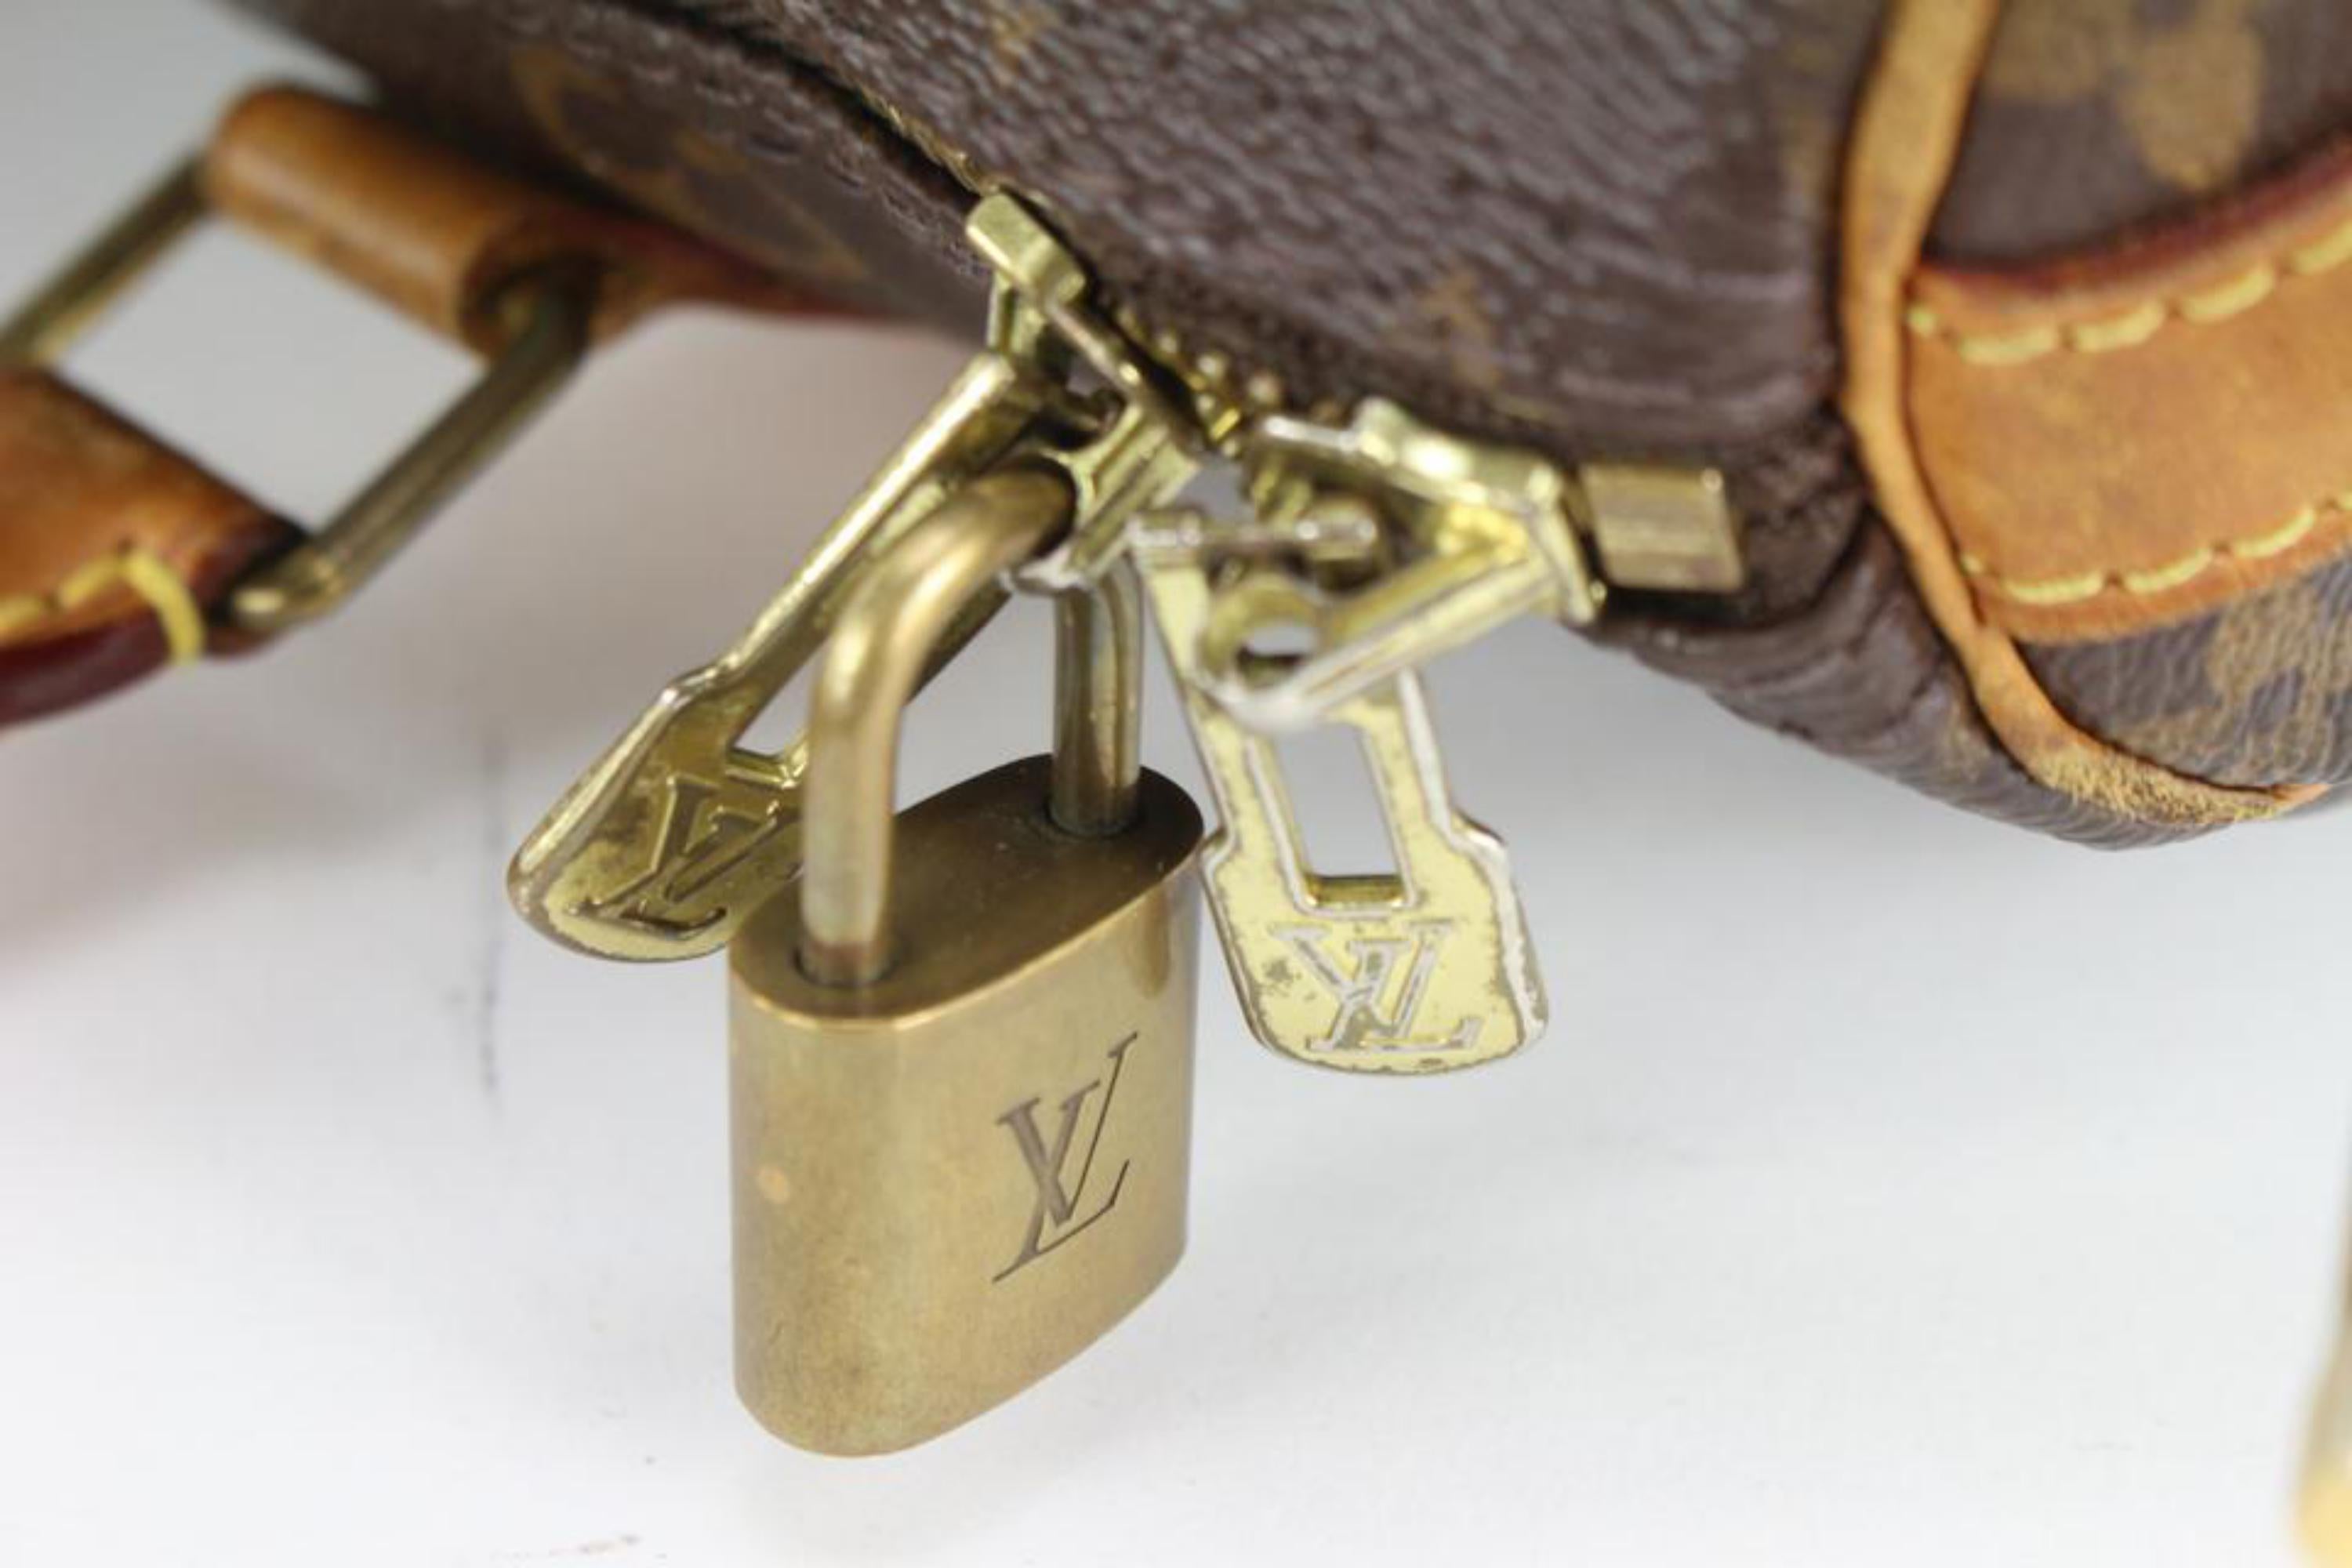 Louis Vuitton Monogram Mon Speed Bandouliere 25 with Strap 9lz526s In Fair Condition For Sale In Dix hills, NY